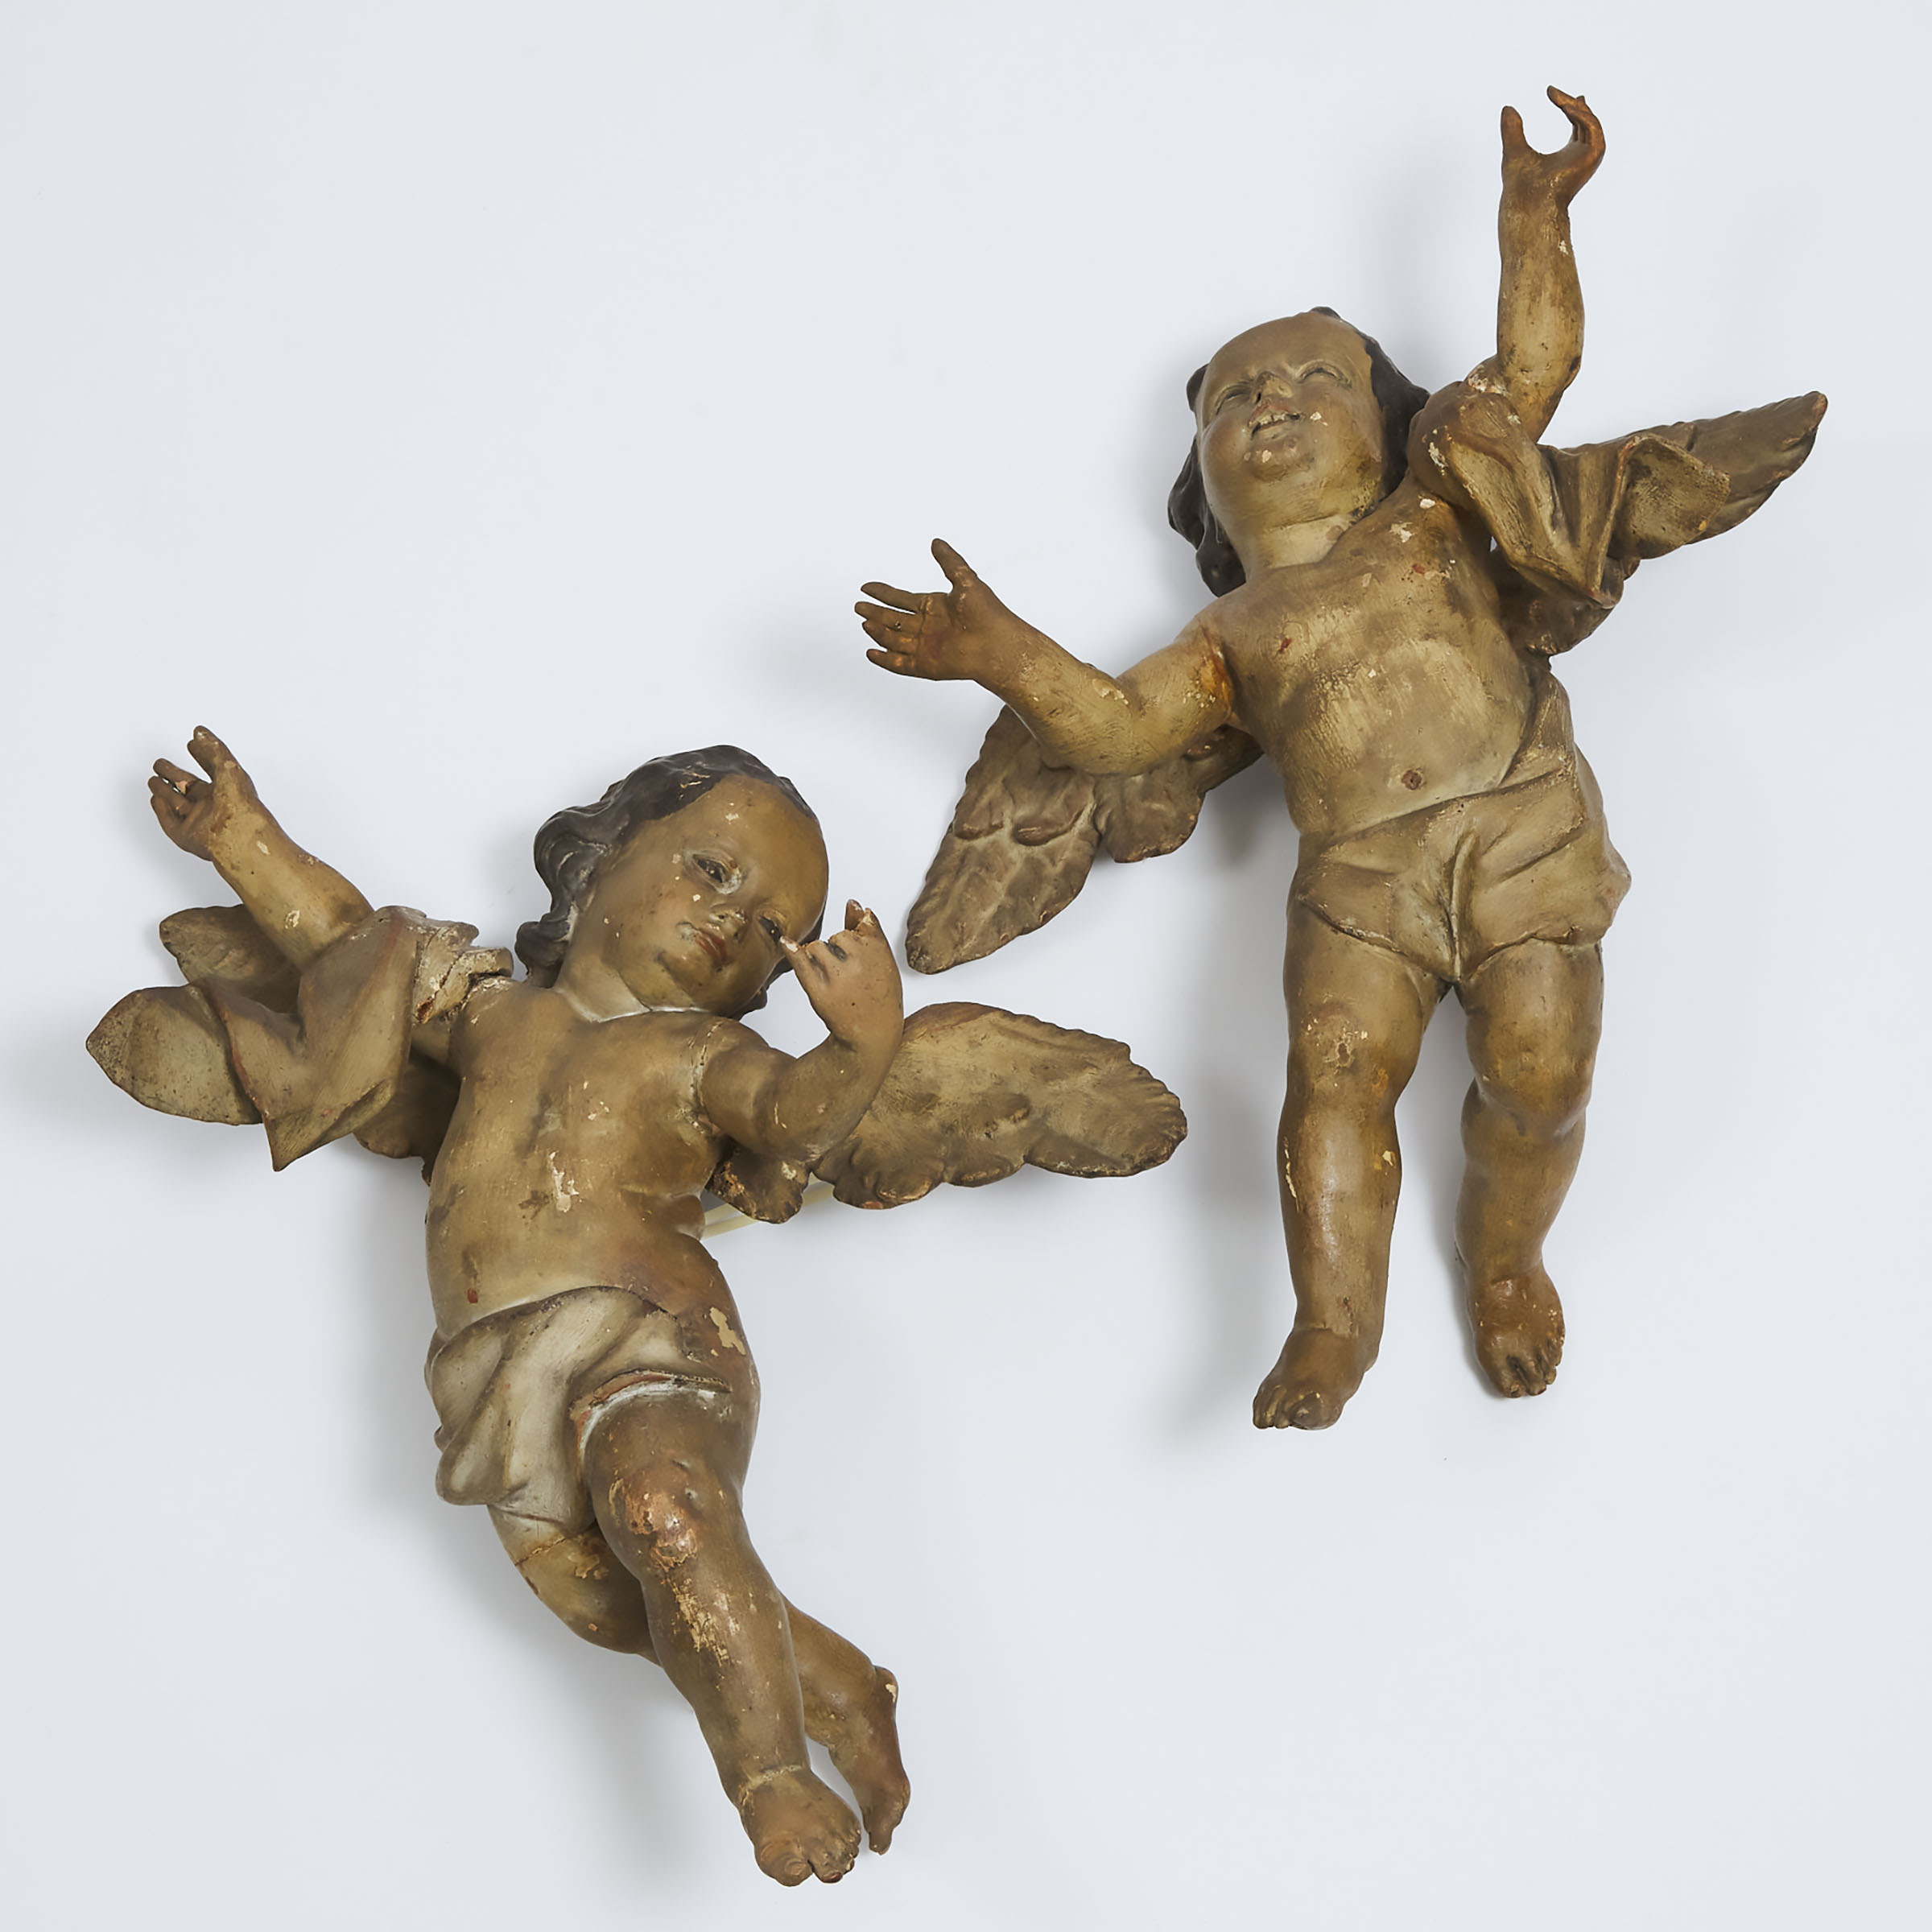 Pair of Large North Italian Baroque Carved and Polychromed Cherubic Figures, 18th/early 19th century